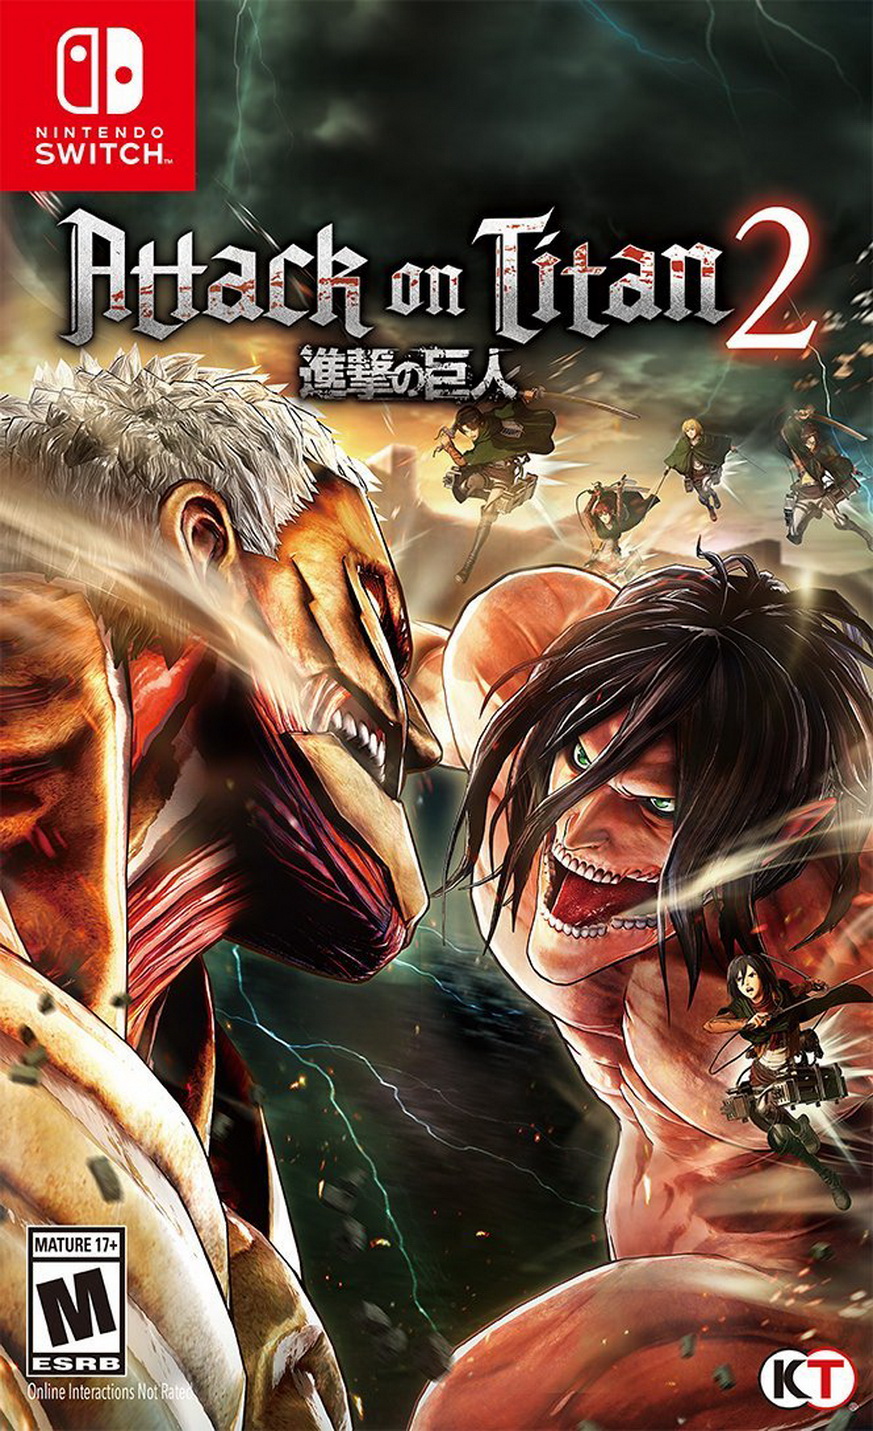 Attack on Titan 2  Online / Multiplayer Missions (Ep.1) 